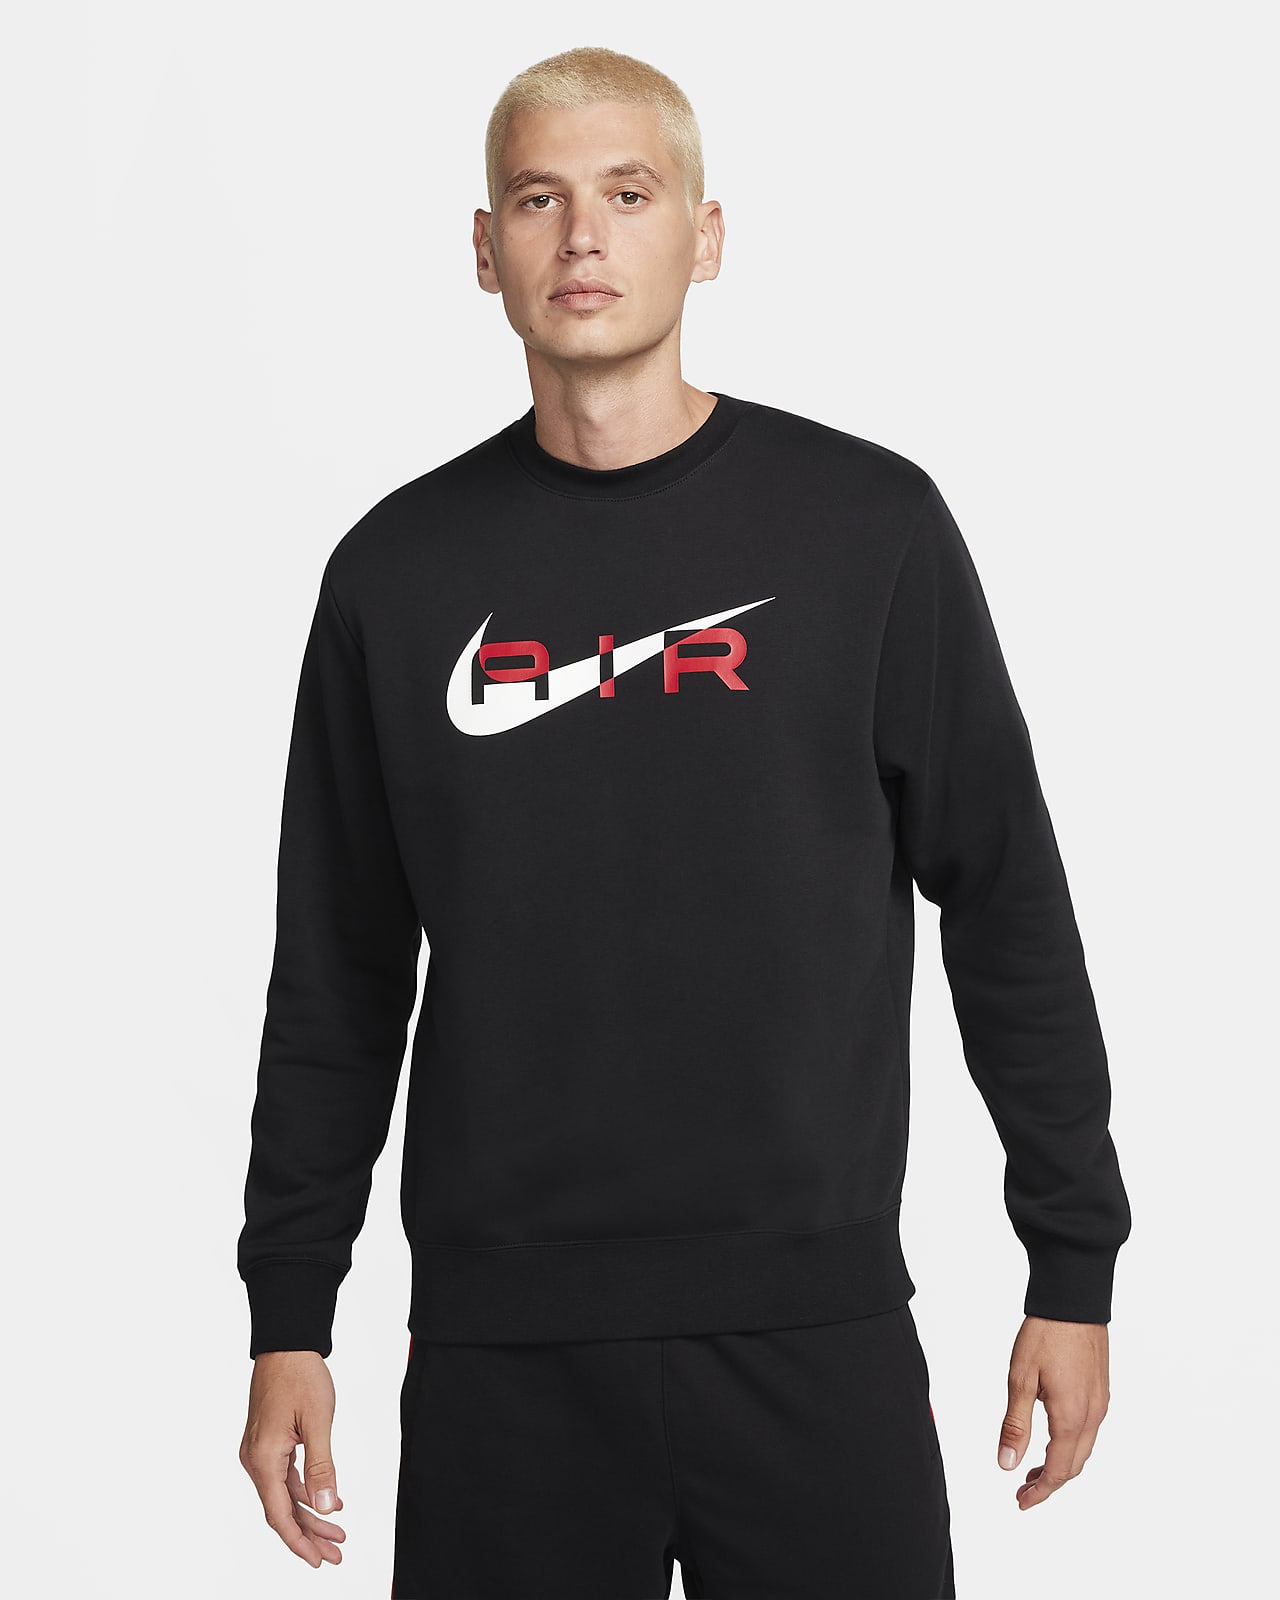 https://static.nike.com/a/images/t_PDP_1280_v1/f_auto,q_auto:eco/267872eb-25dc-43e1-a7d2-17b3ab1b858c/air-fleece-crew-neck-sweatshirt-xBBPsm.png